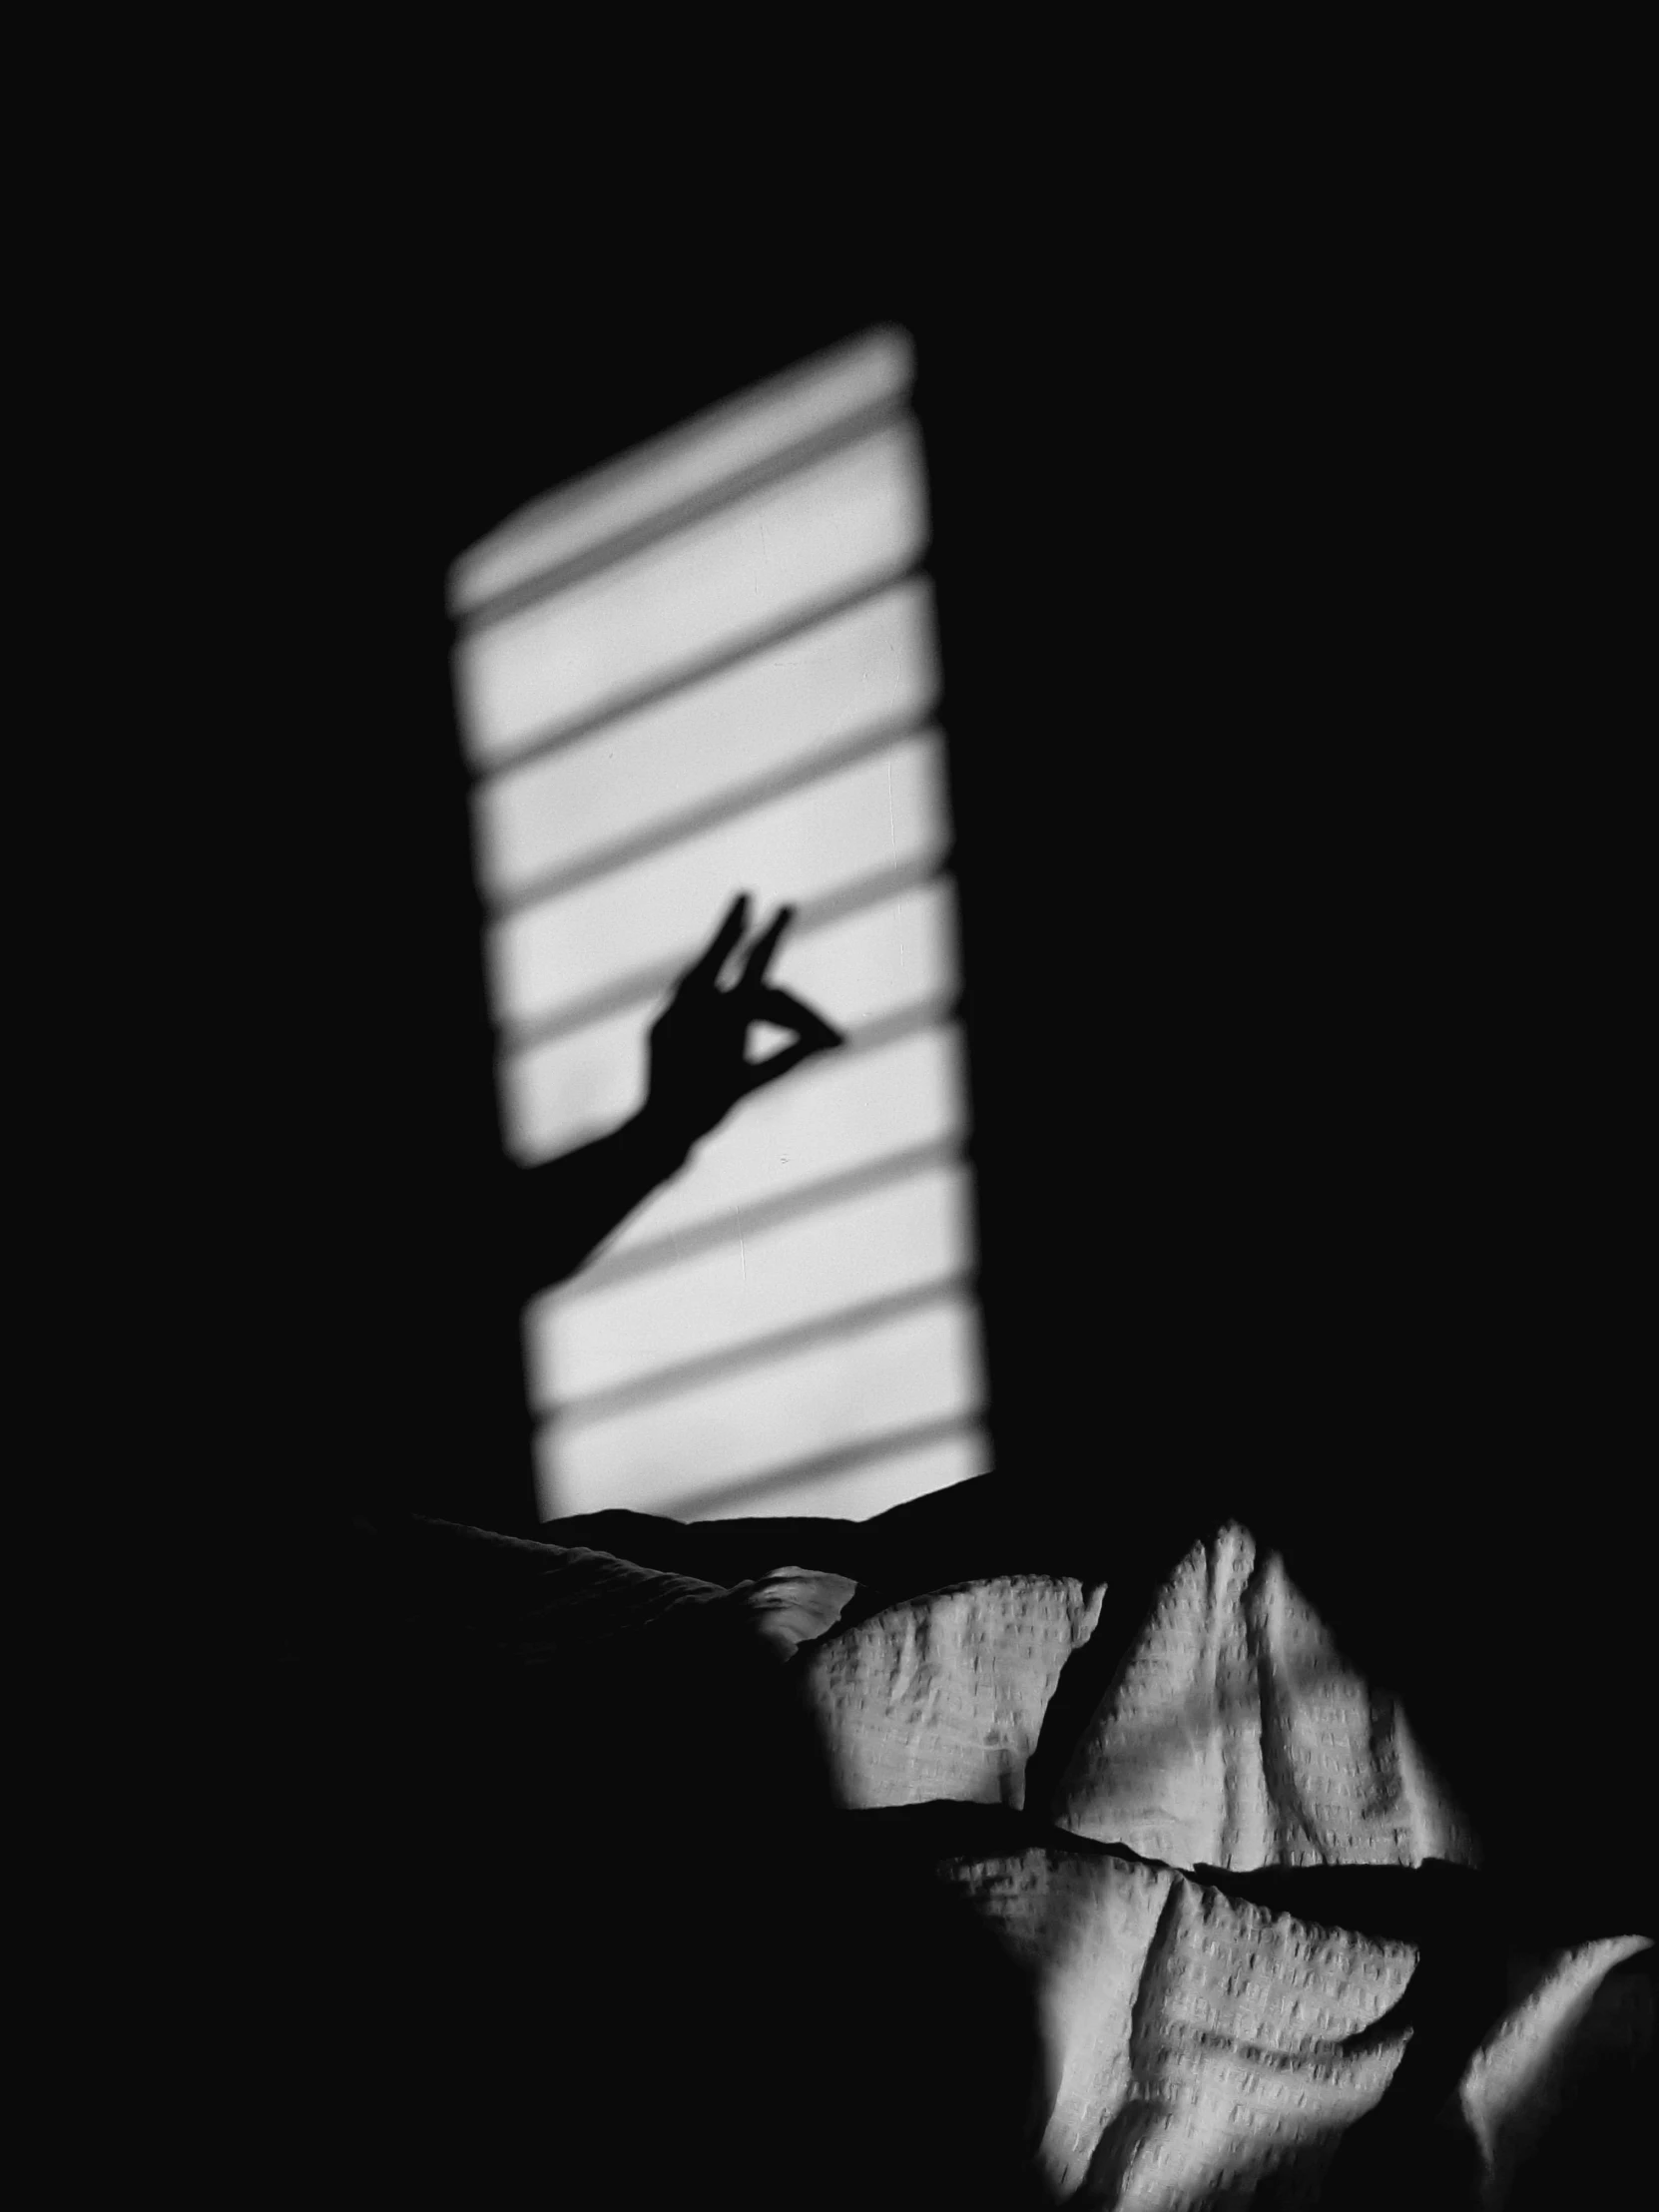 shadow cast on a dark surface with someone's hand reaching out the window